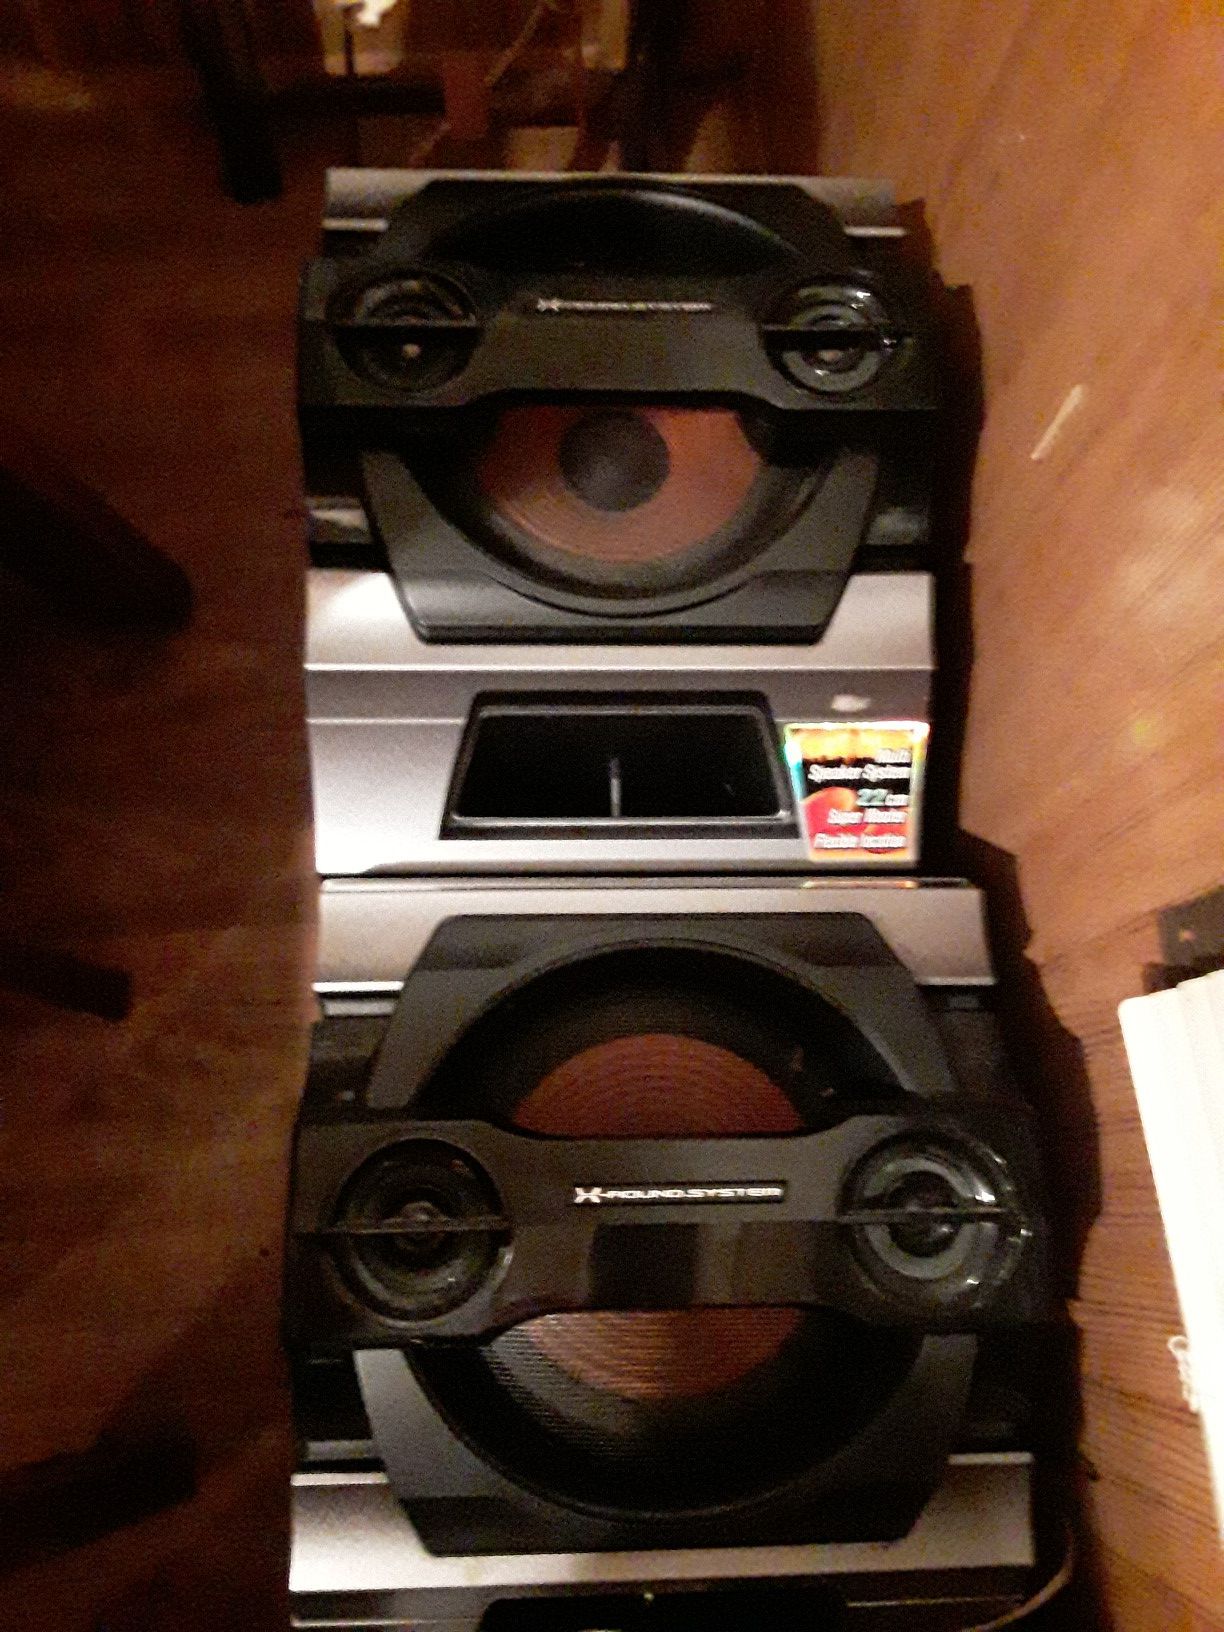 SONY SPEAKER SYSTEM RATED IMPEDANCE 6. INPUT POWER 145W for Sale in San  Antonio, TX - OfferUp